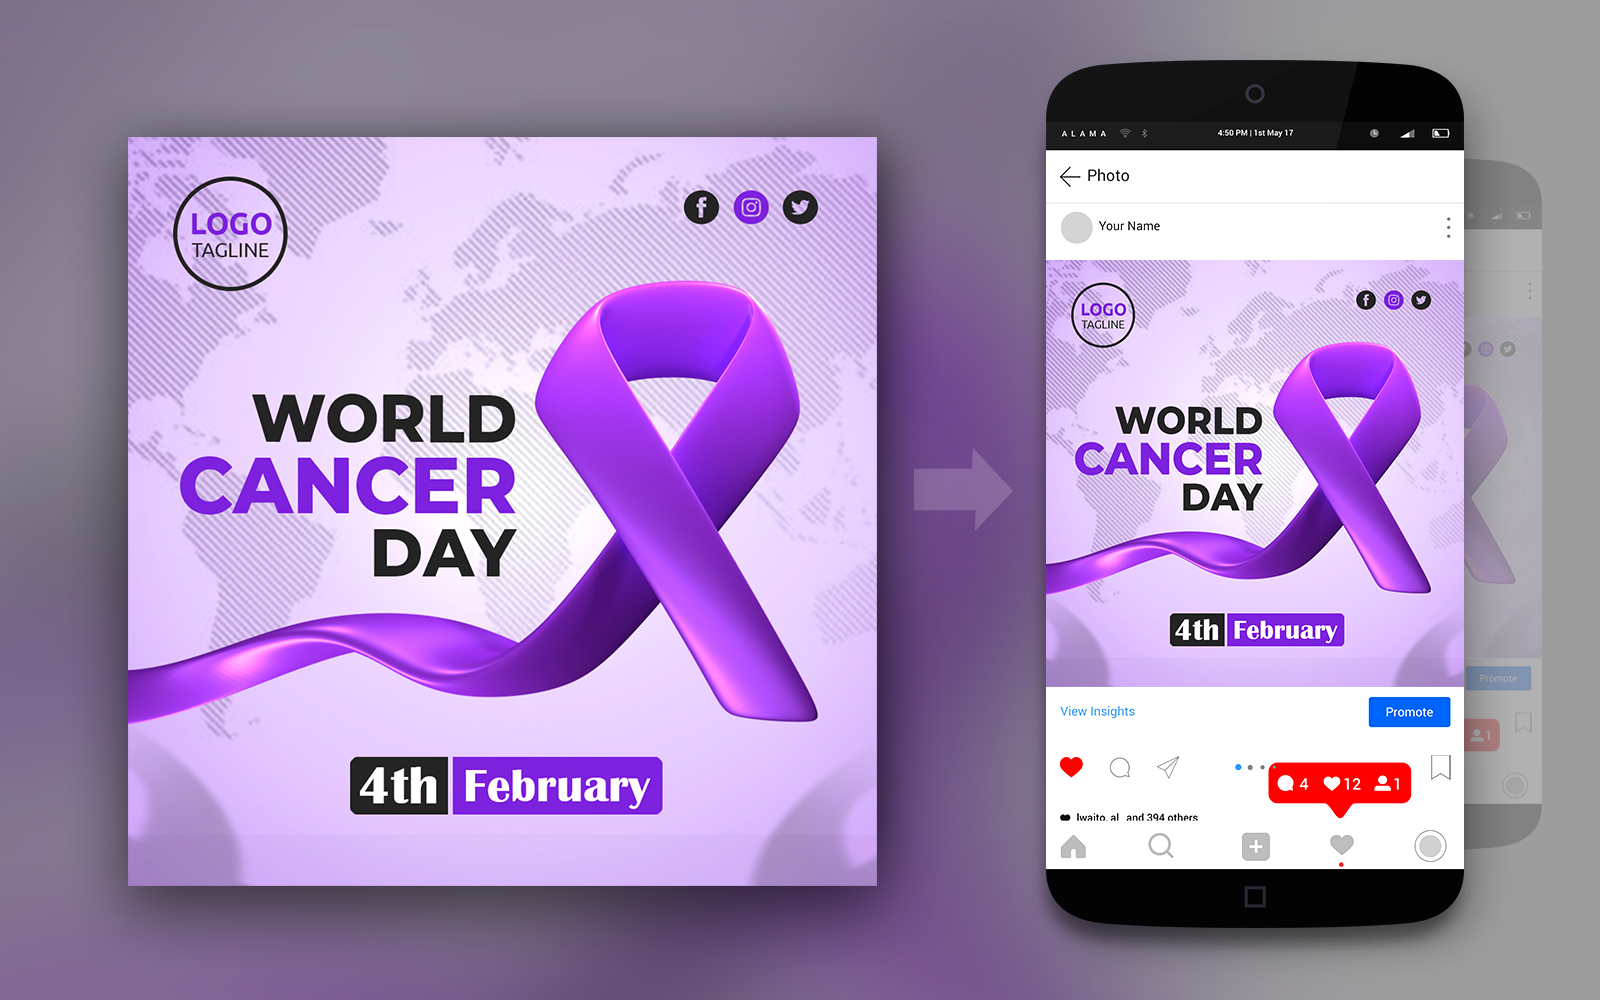 World Cancer Day 3D and Simple Social Media Post Design